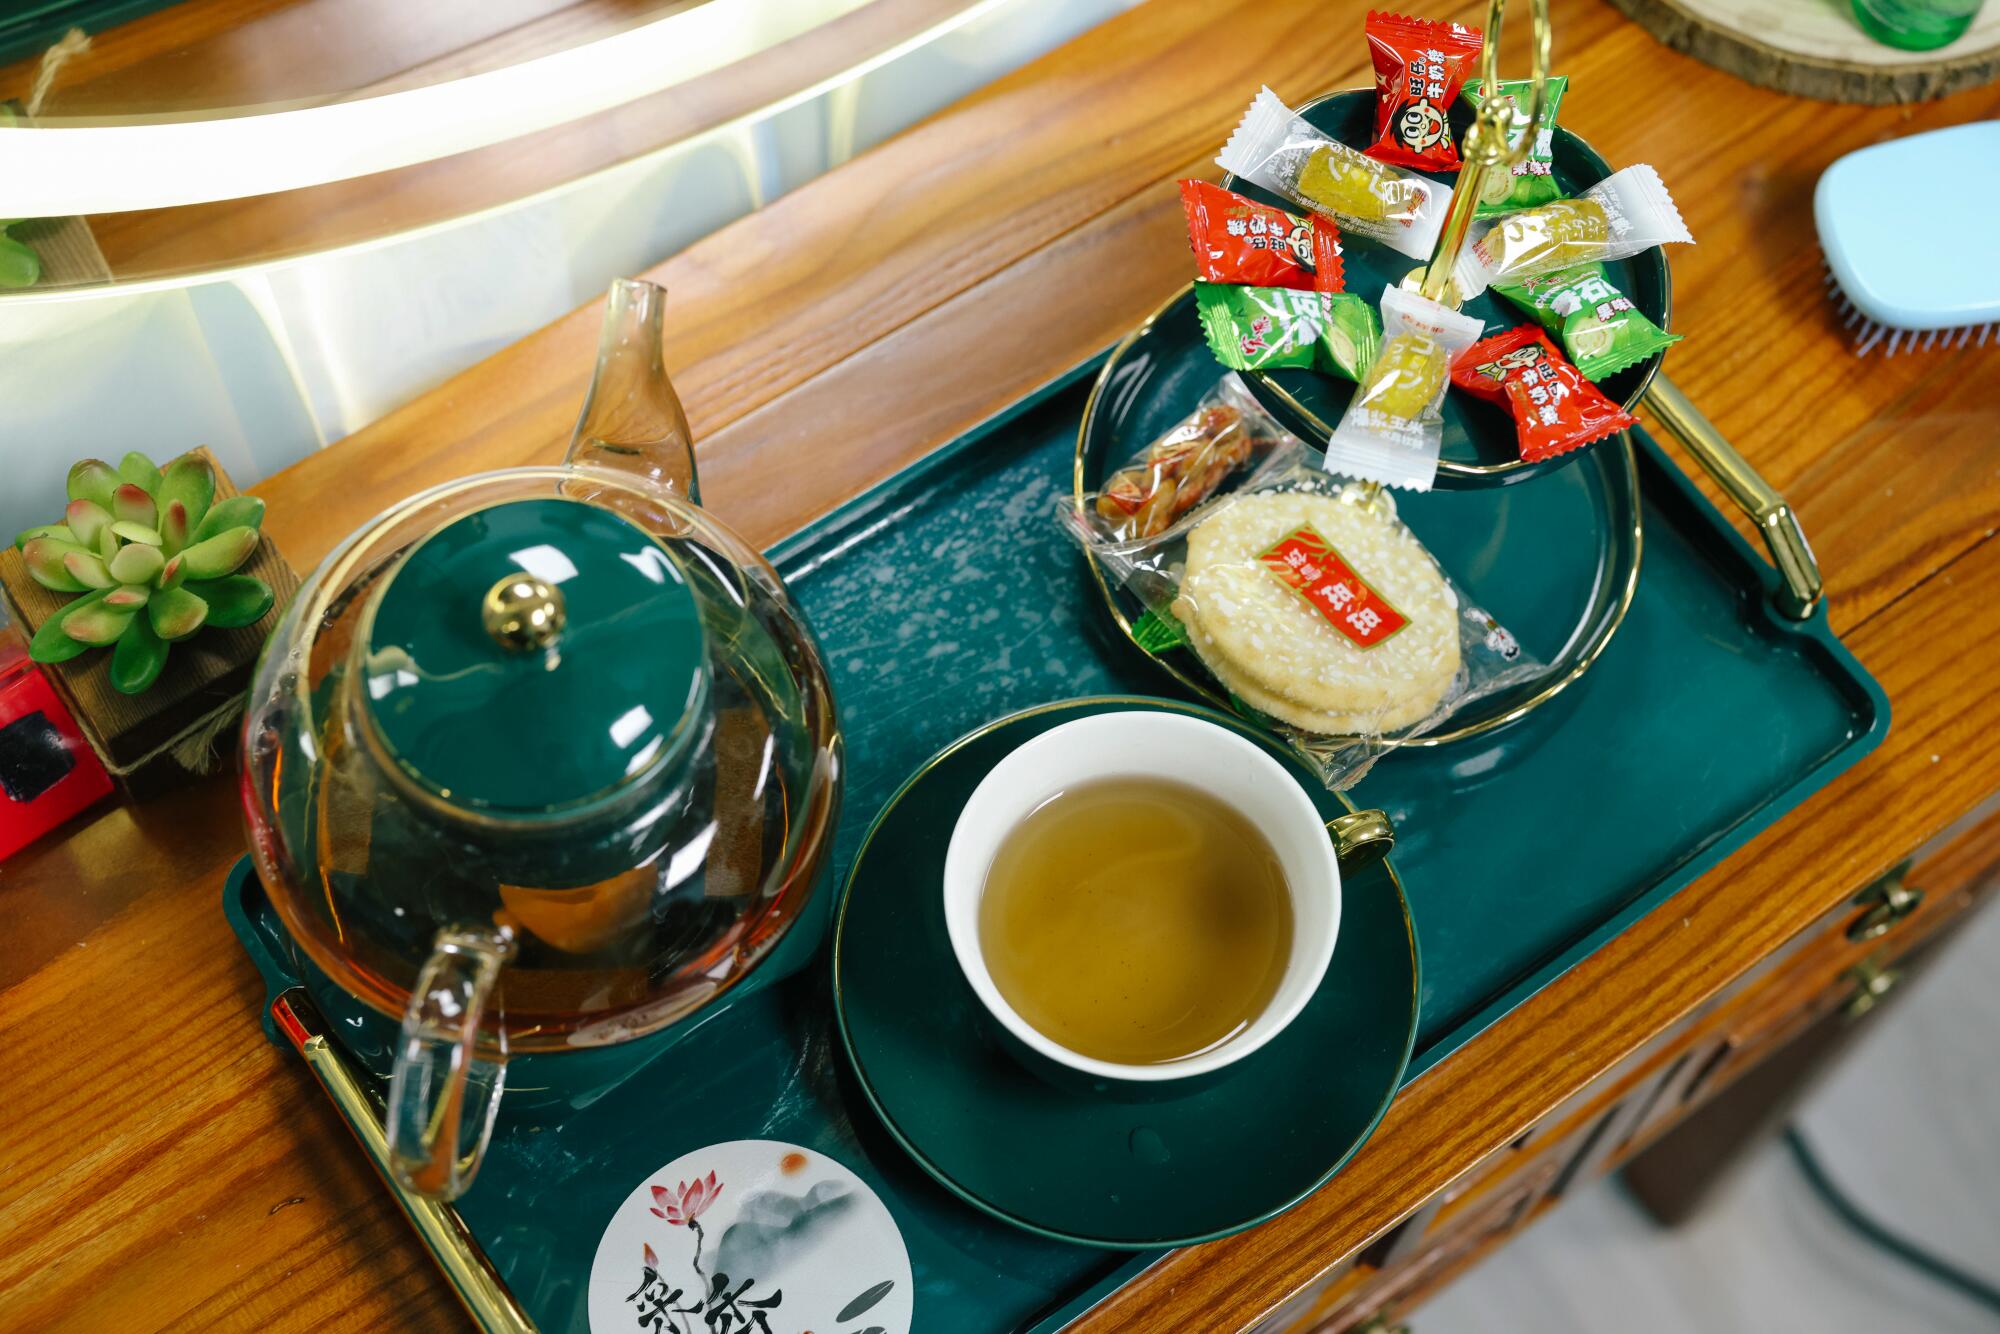 Tea and light snacks are offered after the cleanse, and before the blowout, at Cai Xiang Ge.